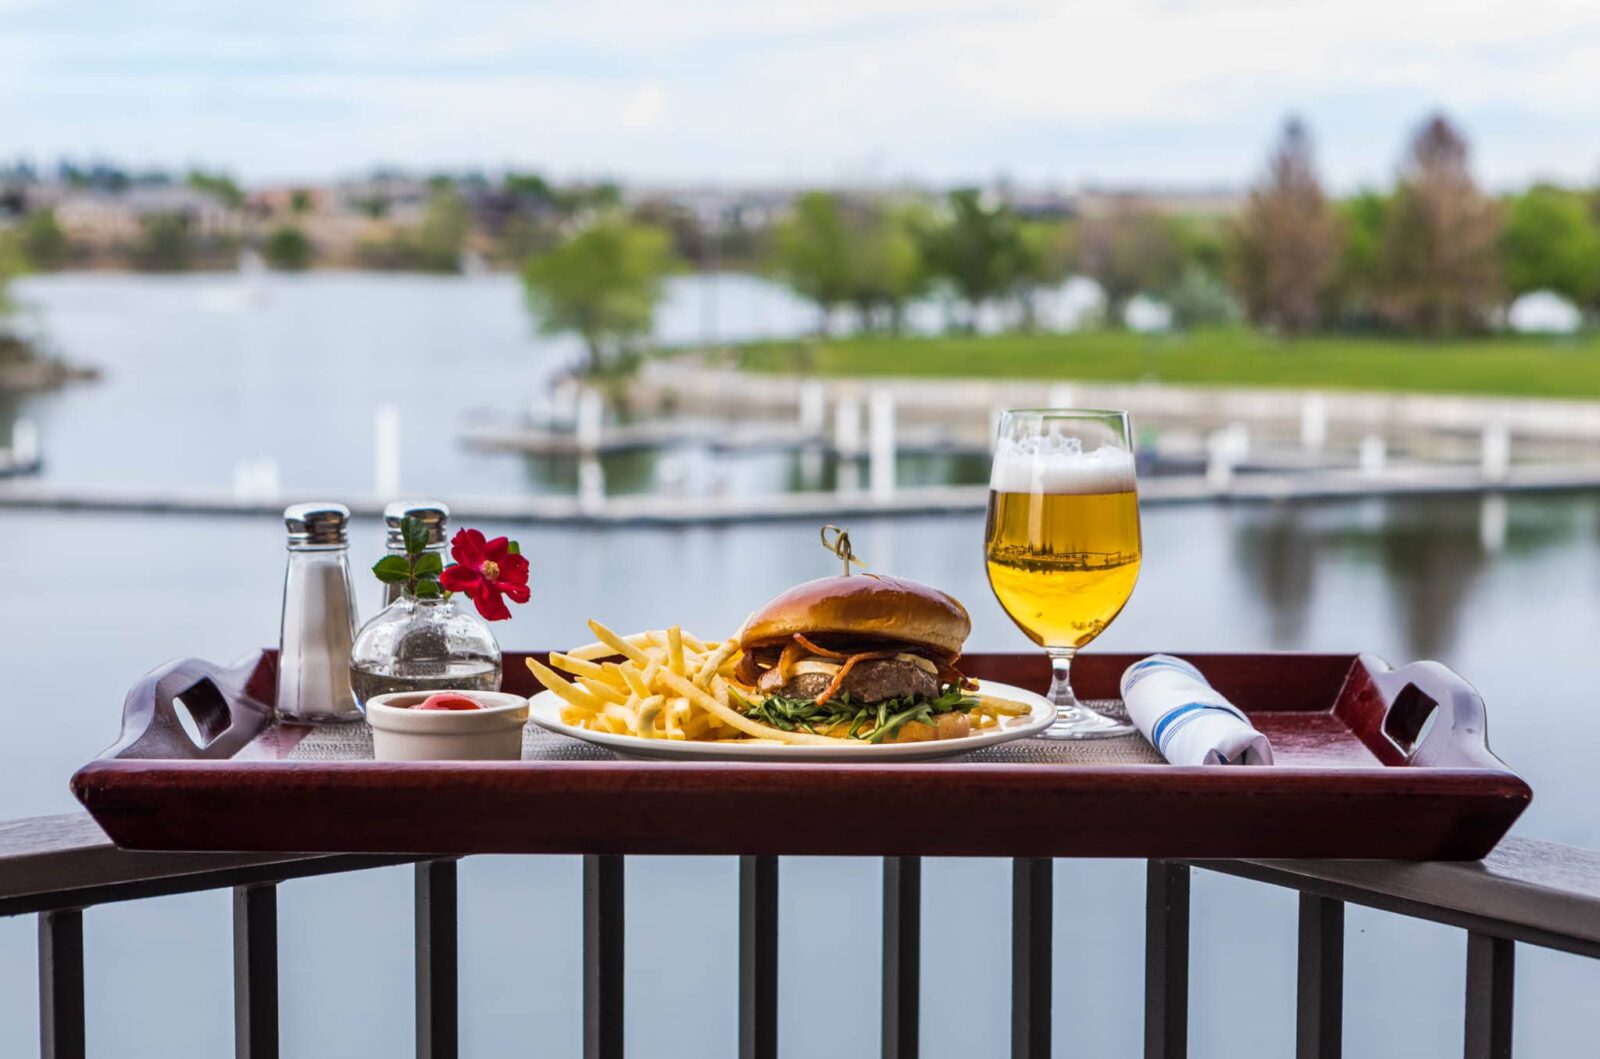 Enjoy a burger on your private balcony overlooking the Columbia River